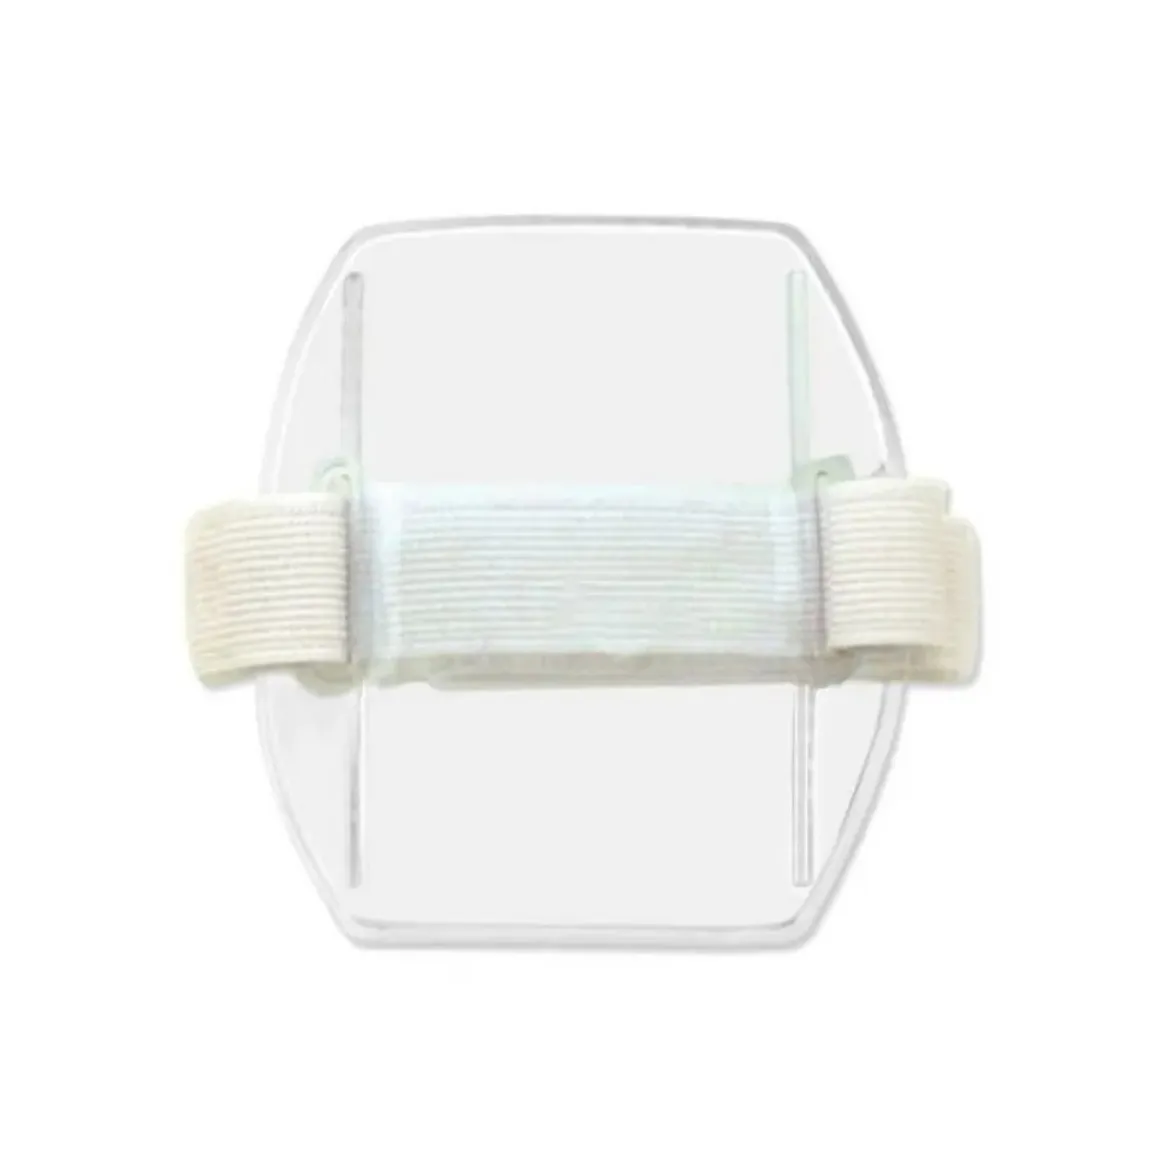 Picture of ARM BAND BADGE HOLDER CLEAR WITH ADJUSTABLE BLUE VELCRO STRAP